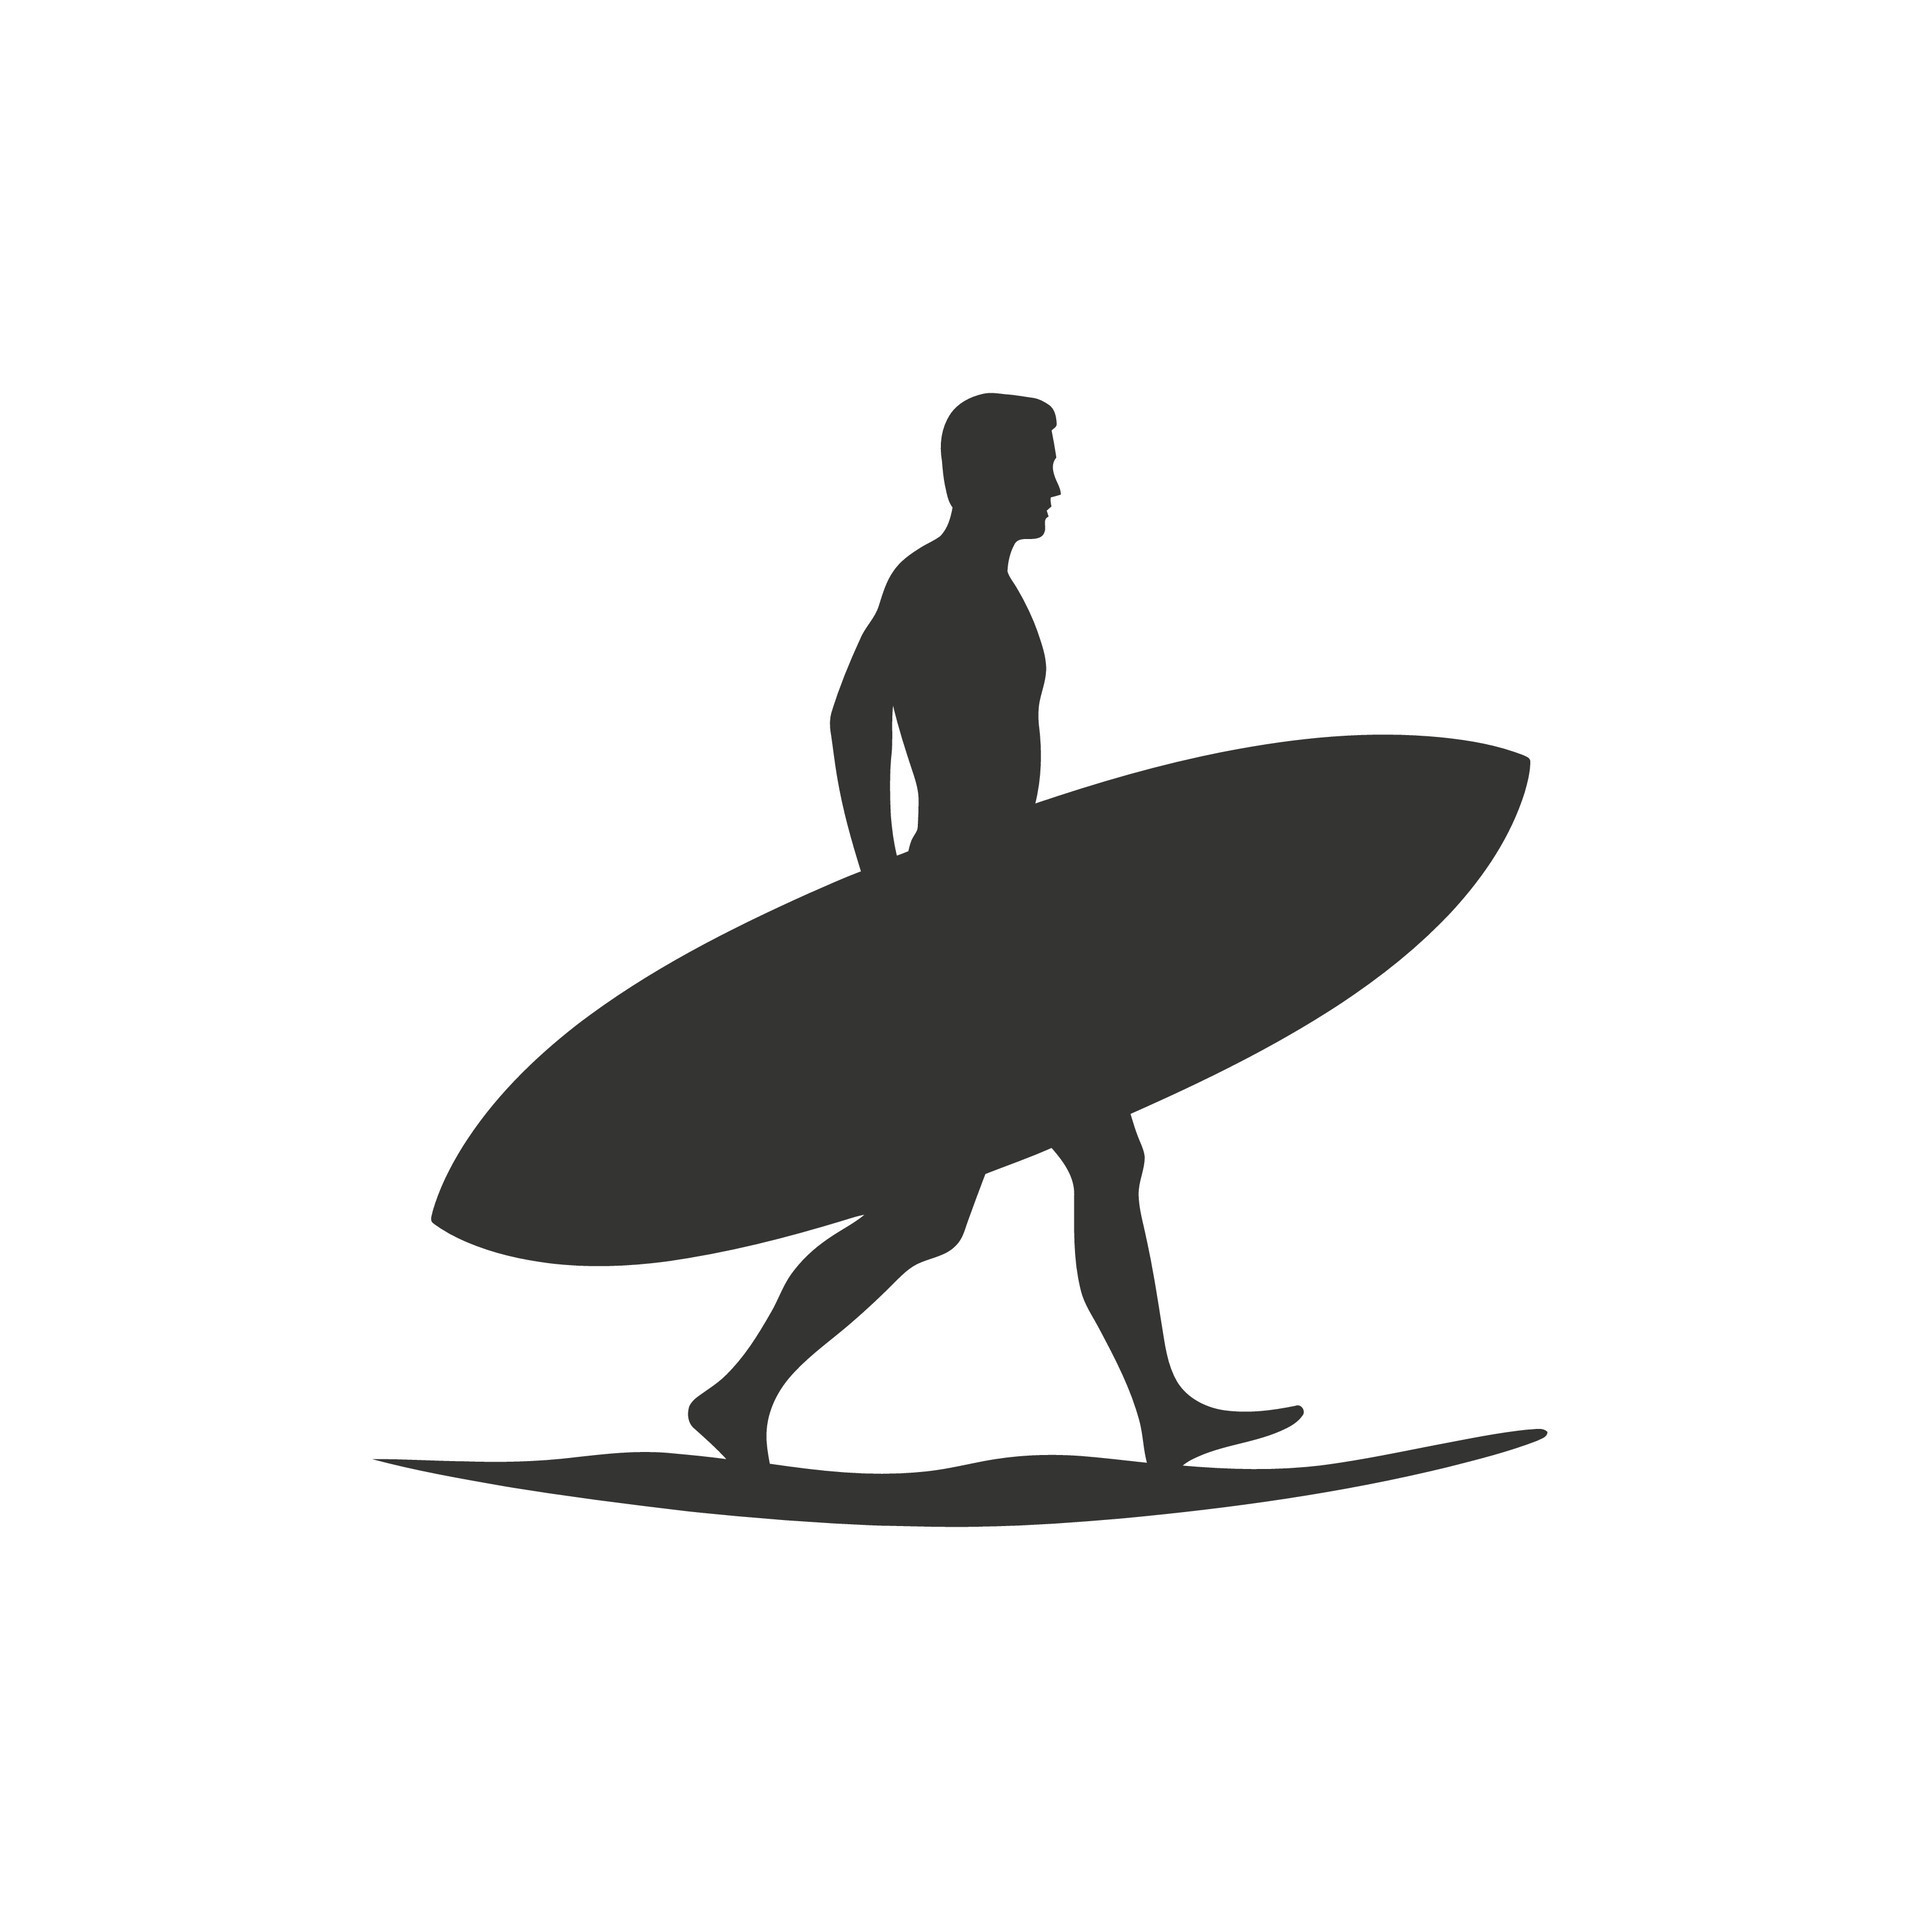 A surfer with their surfboard Icon on White Background - Simple Vector ...